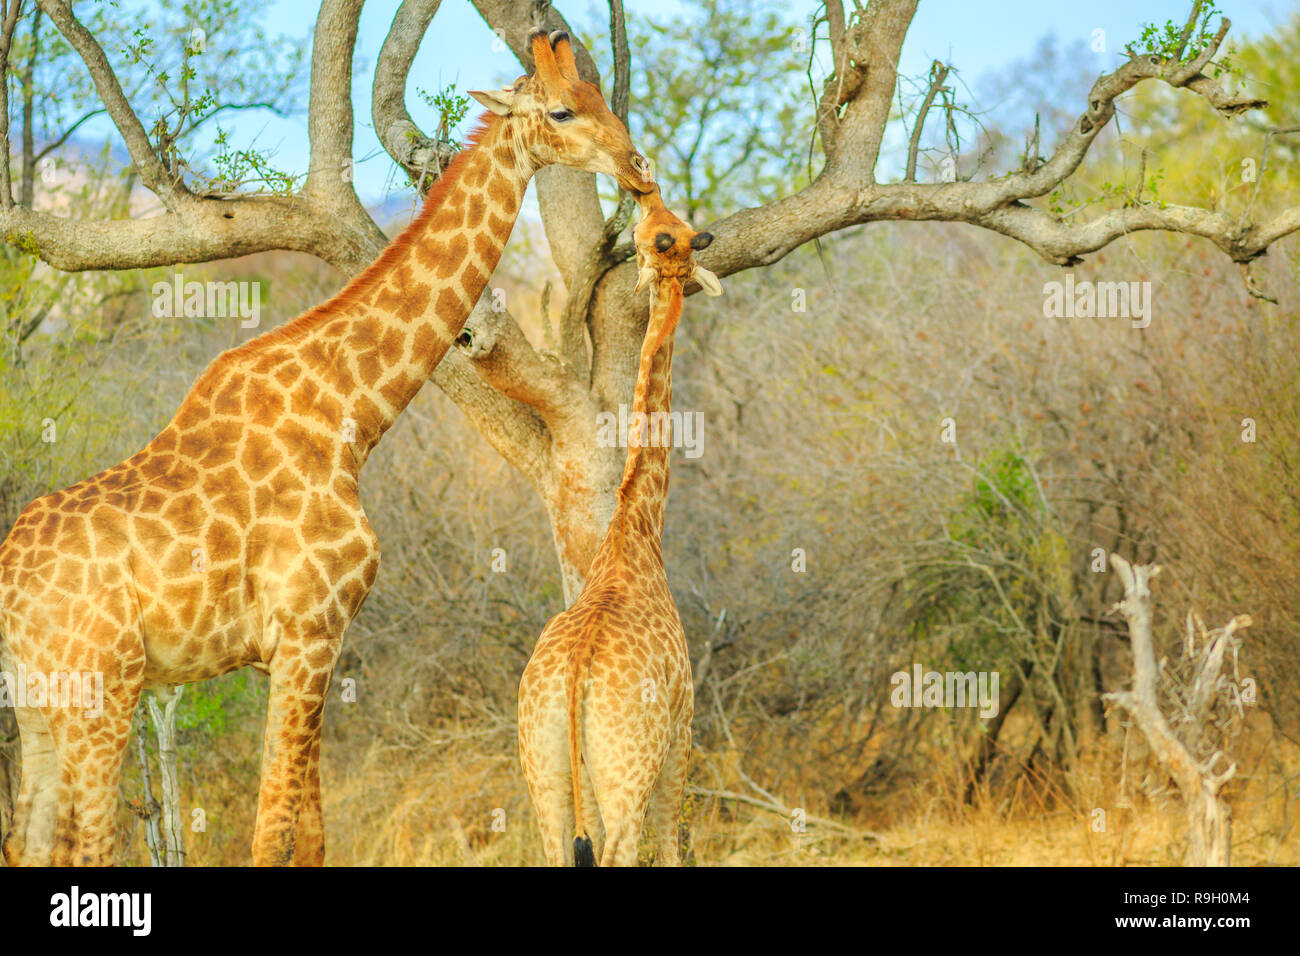 Mom giraffe with calf in Madikwe Game Reserve, South Africa. Two giraffes stretching high for eating from a dry tree. Stock Photo